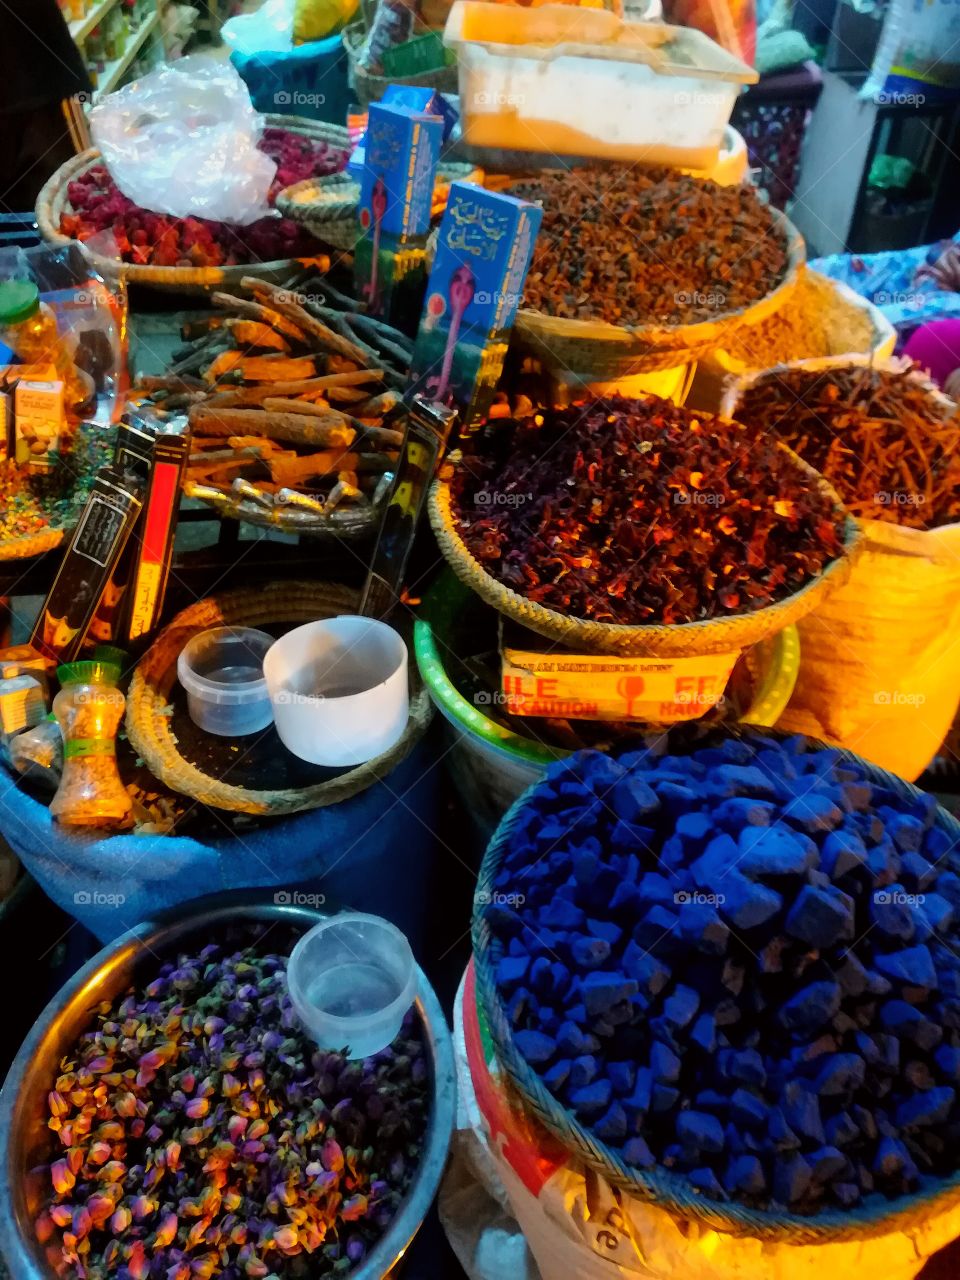 The colors, the strong smells and everything wonderful in Marrakesh